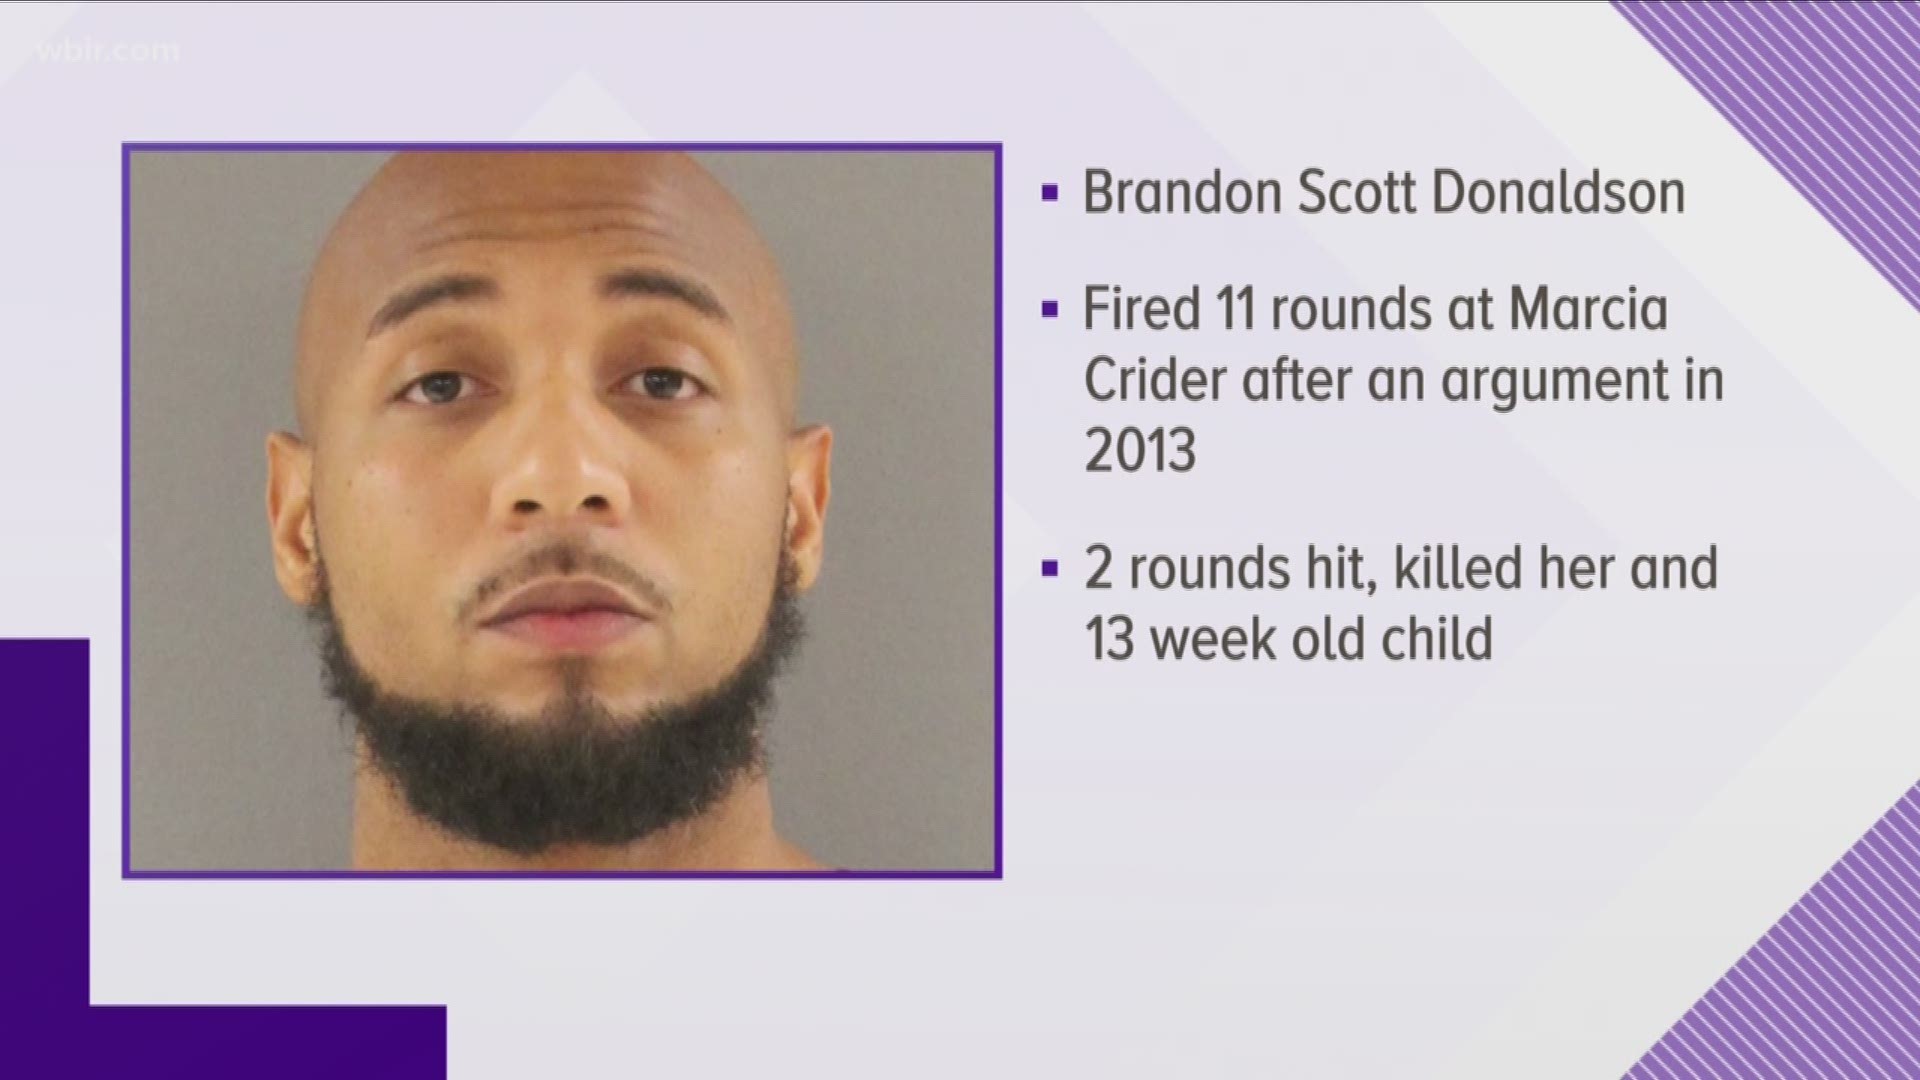 Brandon Donaldson faced a second trial in the shooting death of Marcia Crider, who was 13-weeks pregnant.